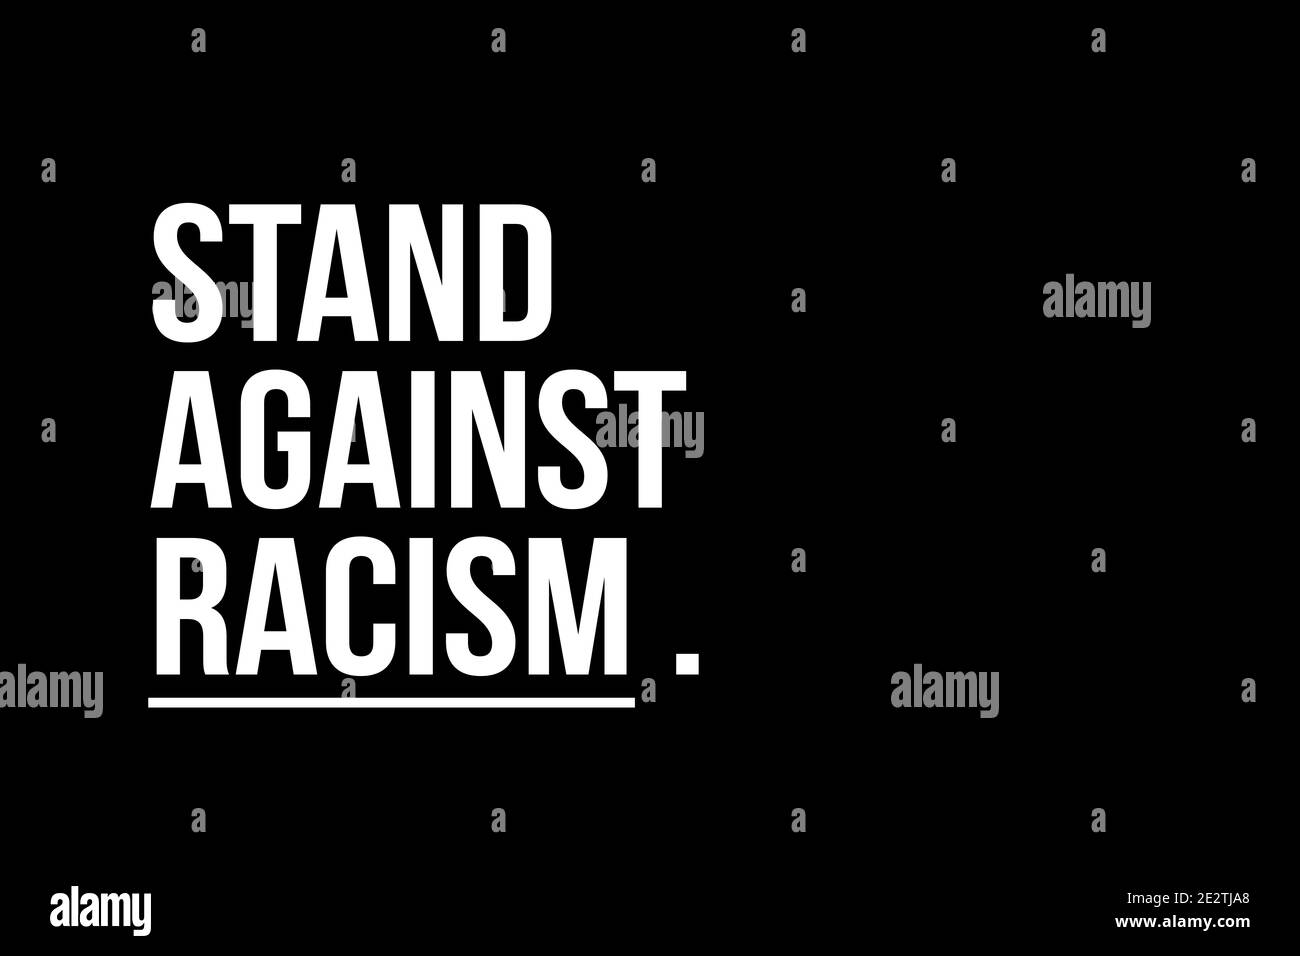 Stand aginst racism. We are all the same. Say no to racism. Stock Photo